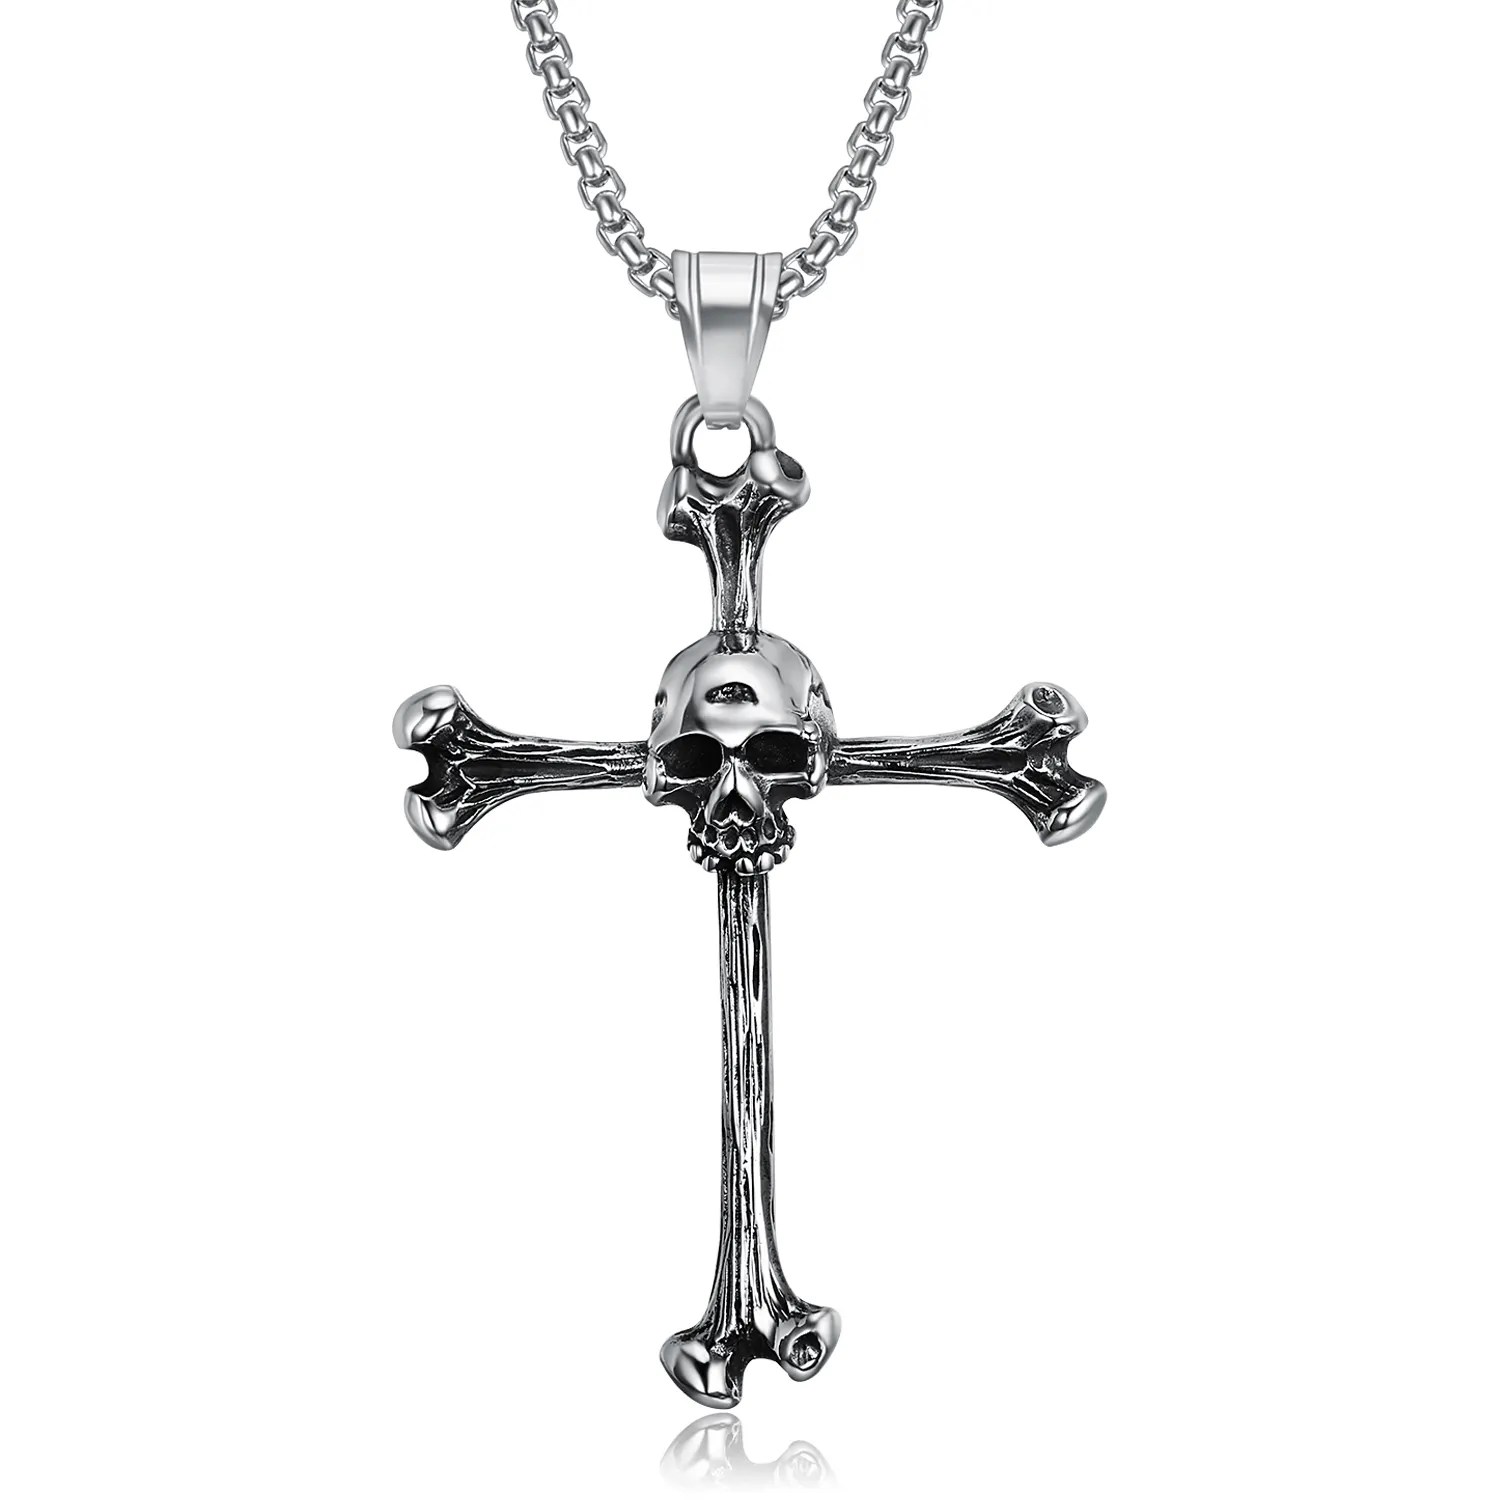 high quality stainless steel punk bikers gothic skulls bones cross necklace pendant pirate skeleton skull cross necklace charm